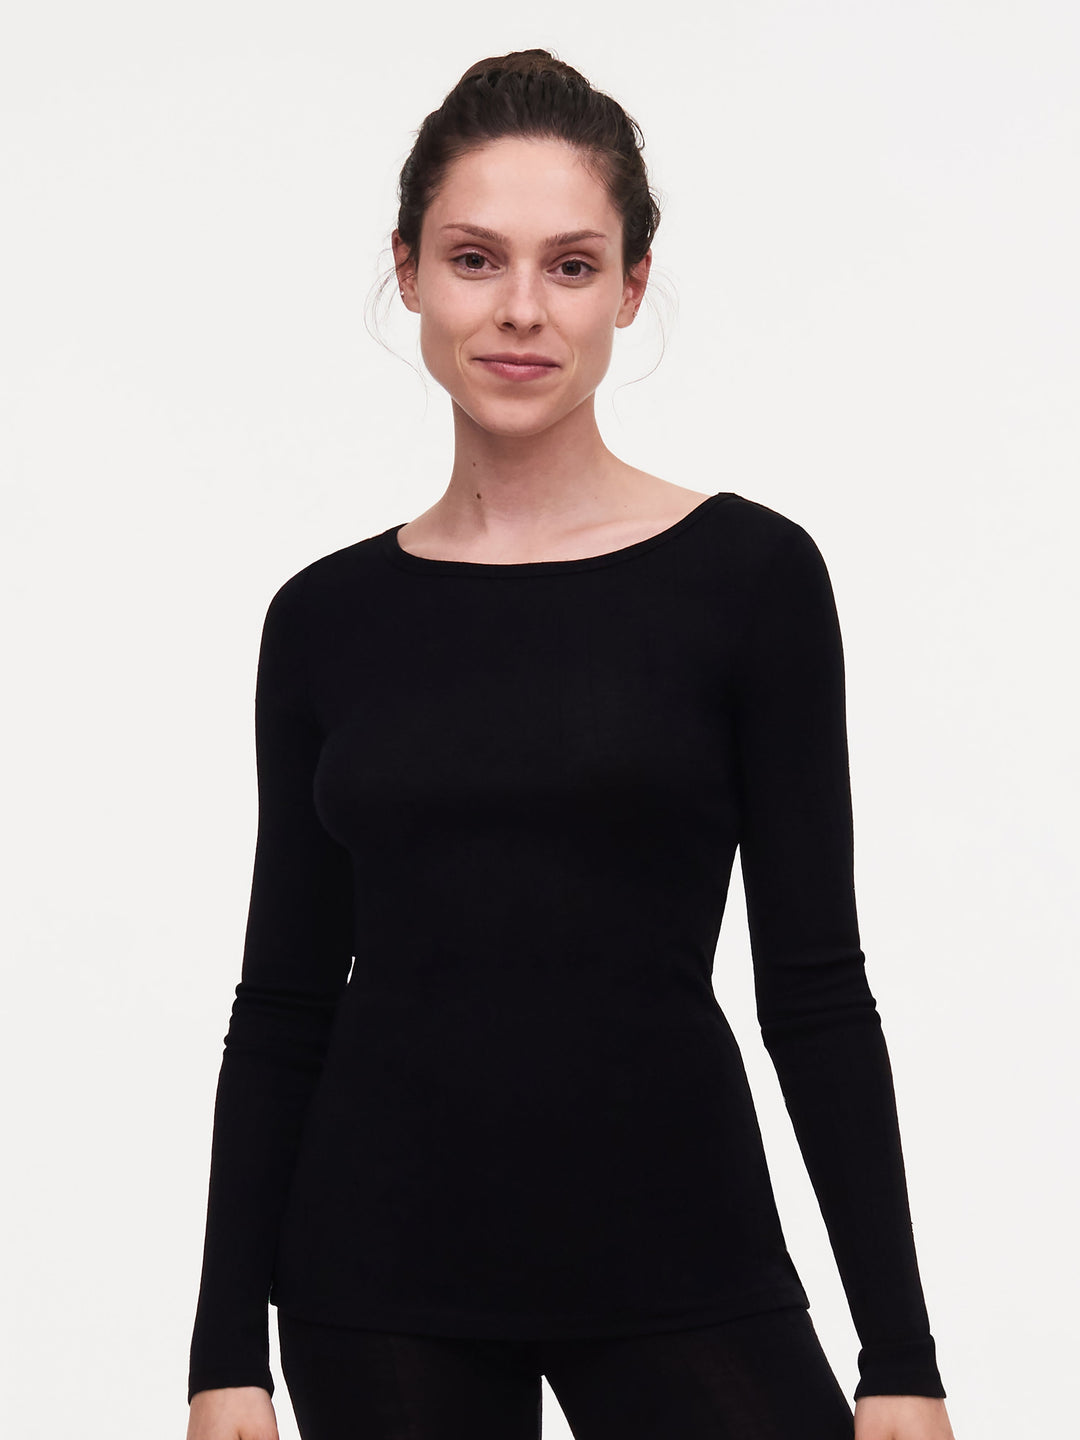 Chantelle Thermo Comfort T-Shirt Long Sleeves - Black Top Chantelle 